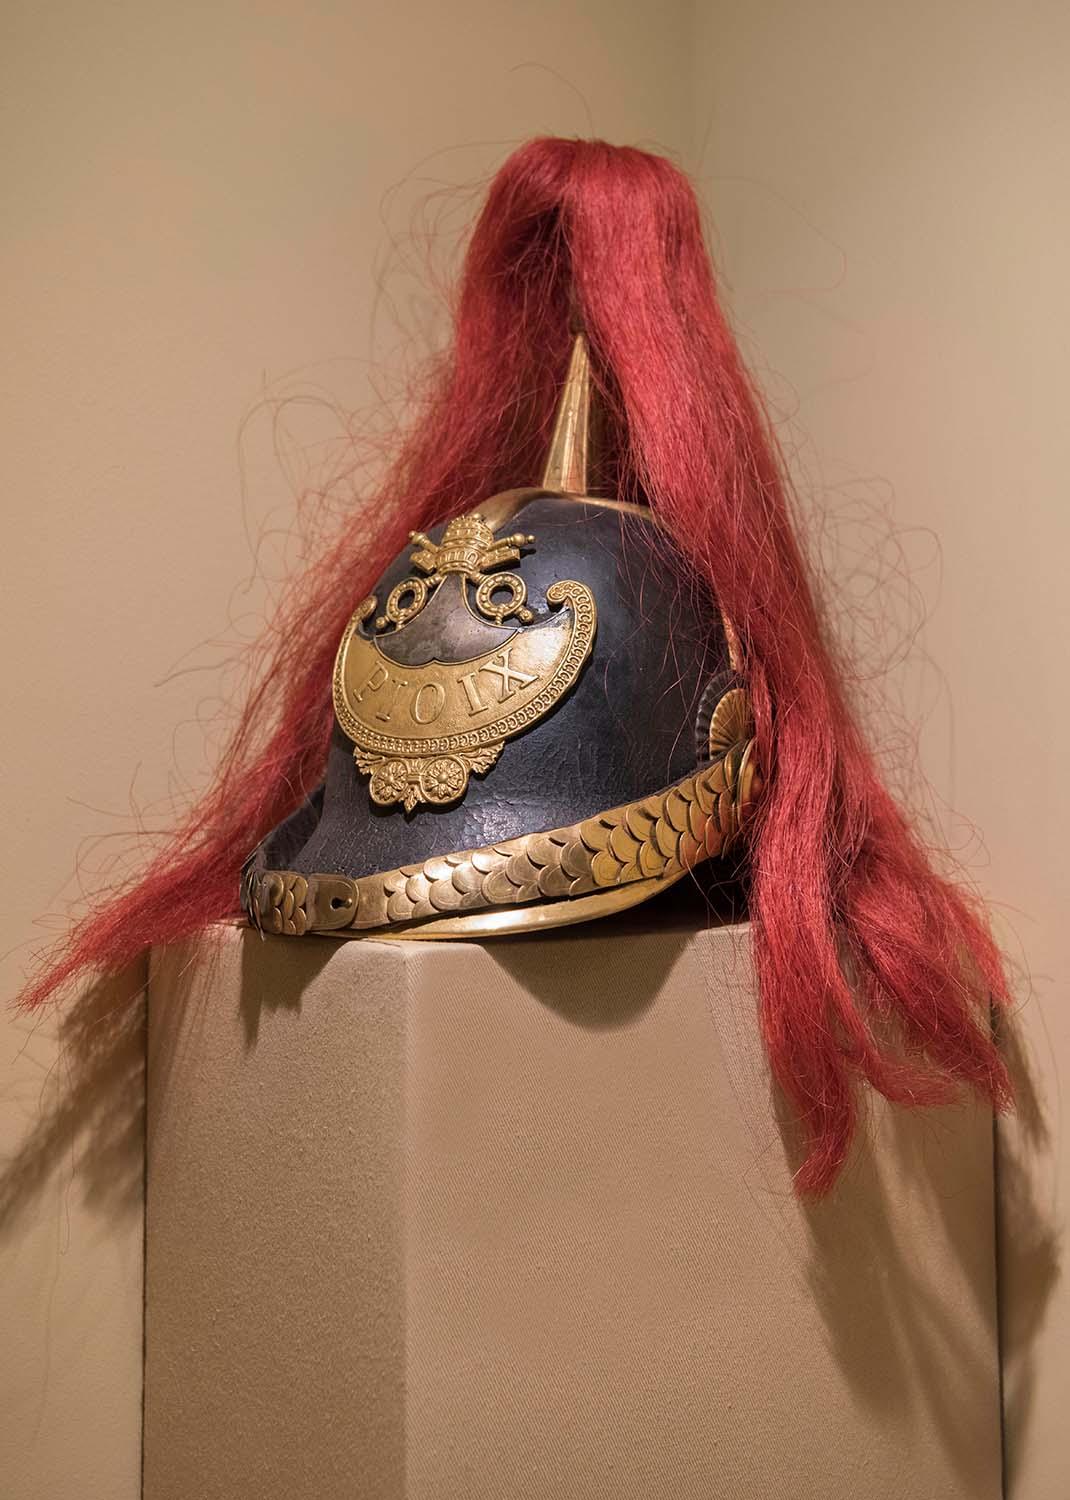 Officer’s helmet of the Civic Guard of Pius IX